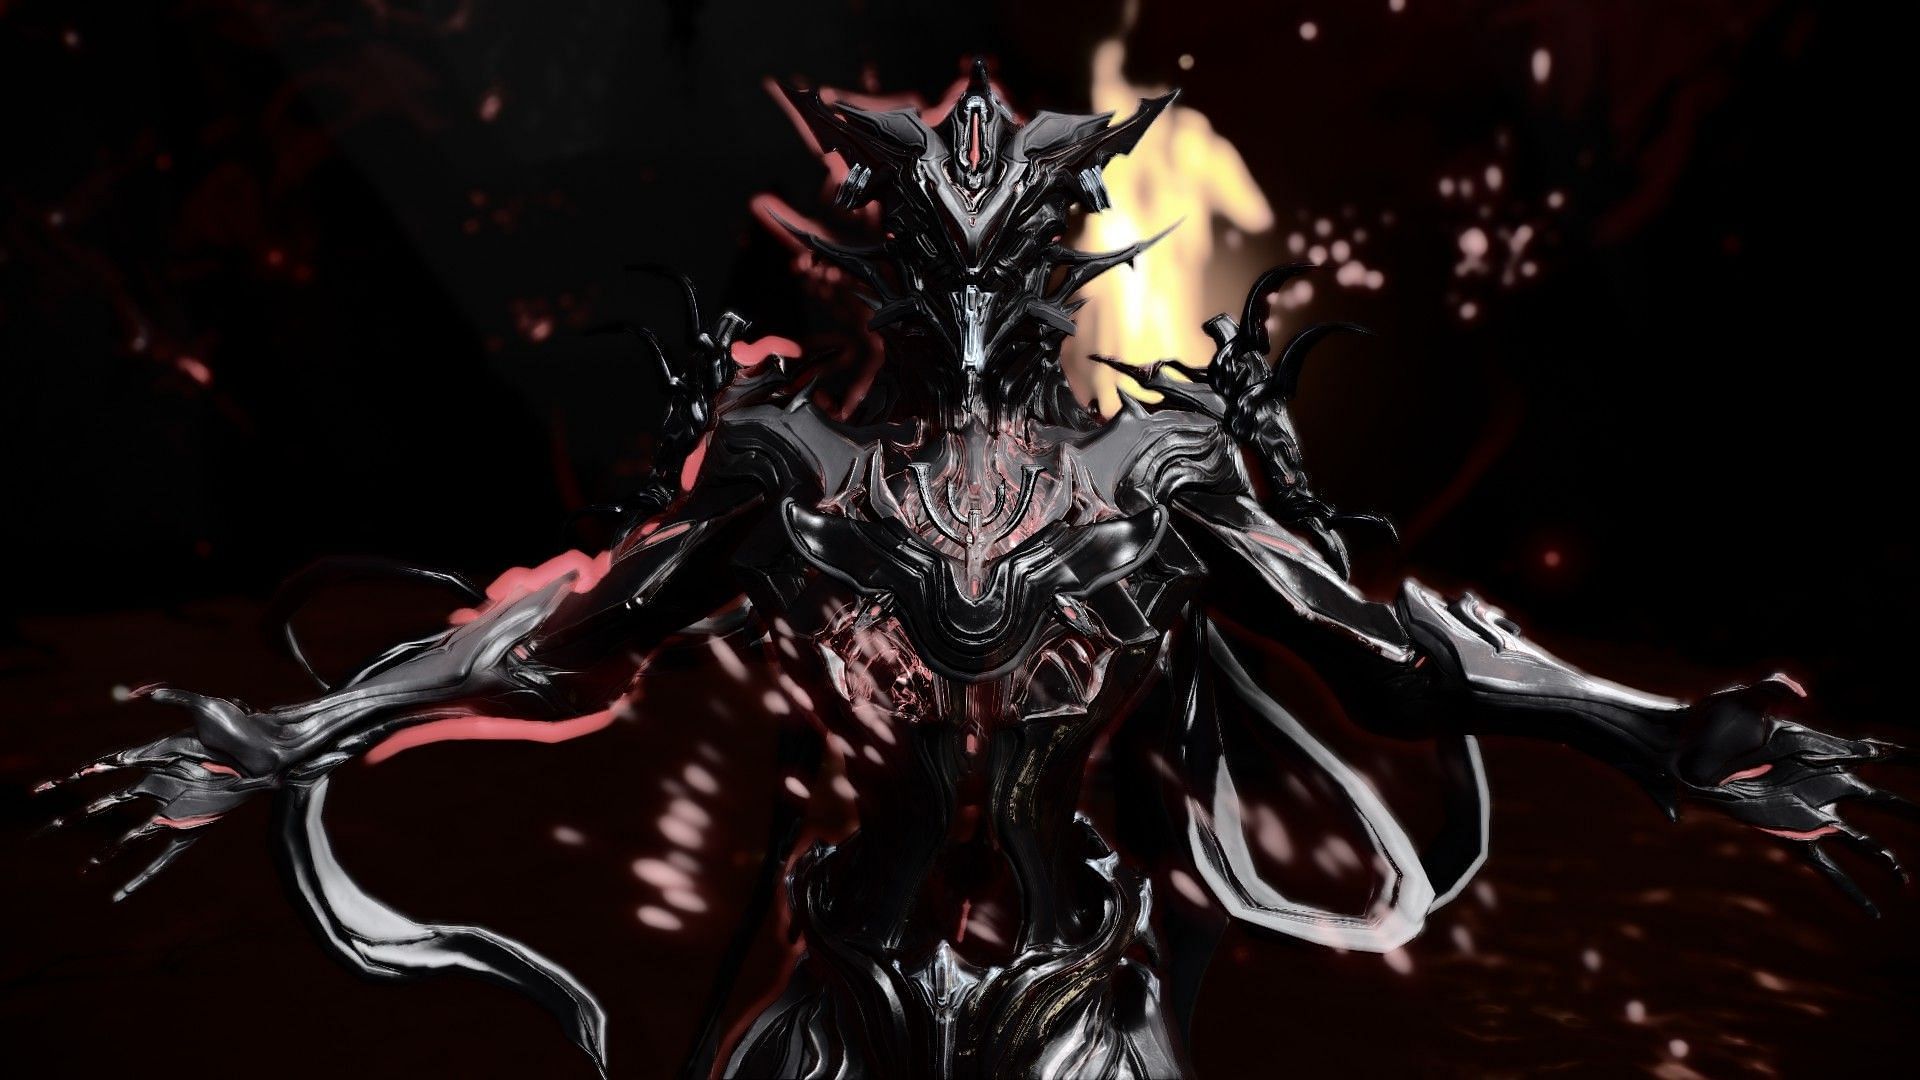 Nekros can Desecrate corpses in Warframe to reroll their loot pool (Image via Digital Extremes)